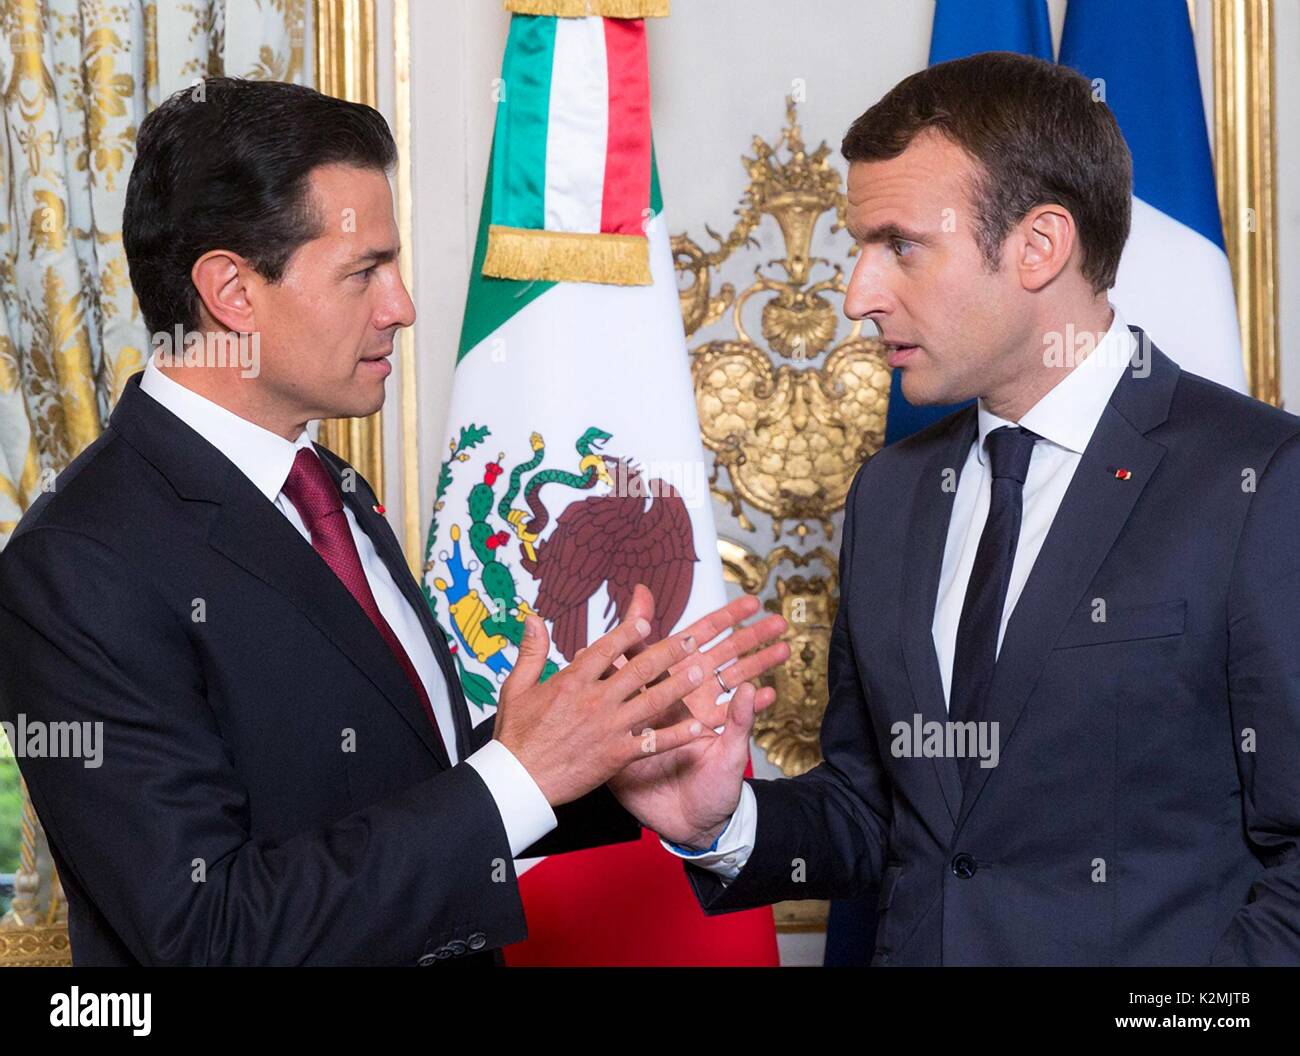 Mexican President Enrique Pena Nieto, left, during a bilateral meeting with French President Emmanuel Macron at the Elysee Palace July 7, 2017 in Paris, France. Stock Photo